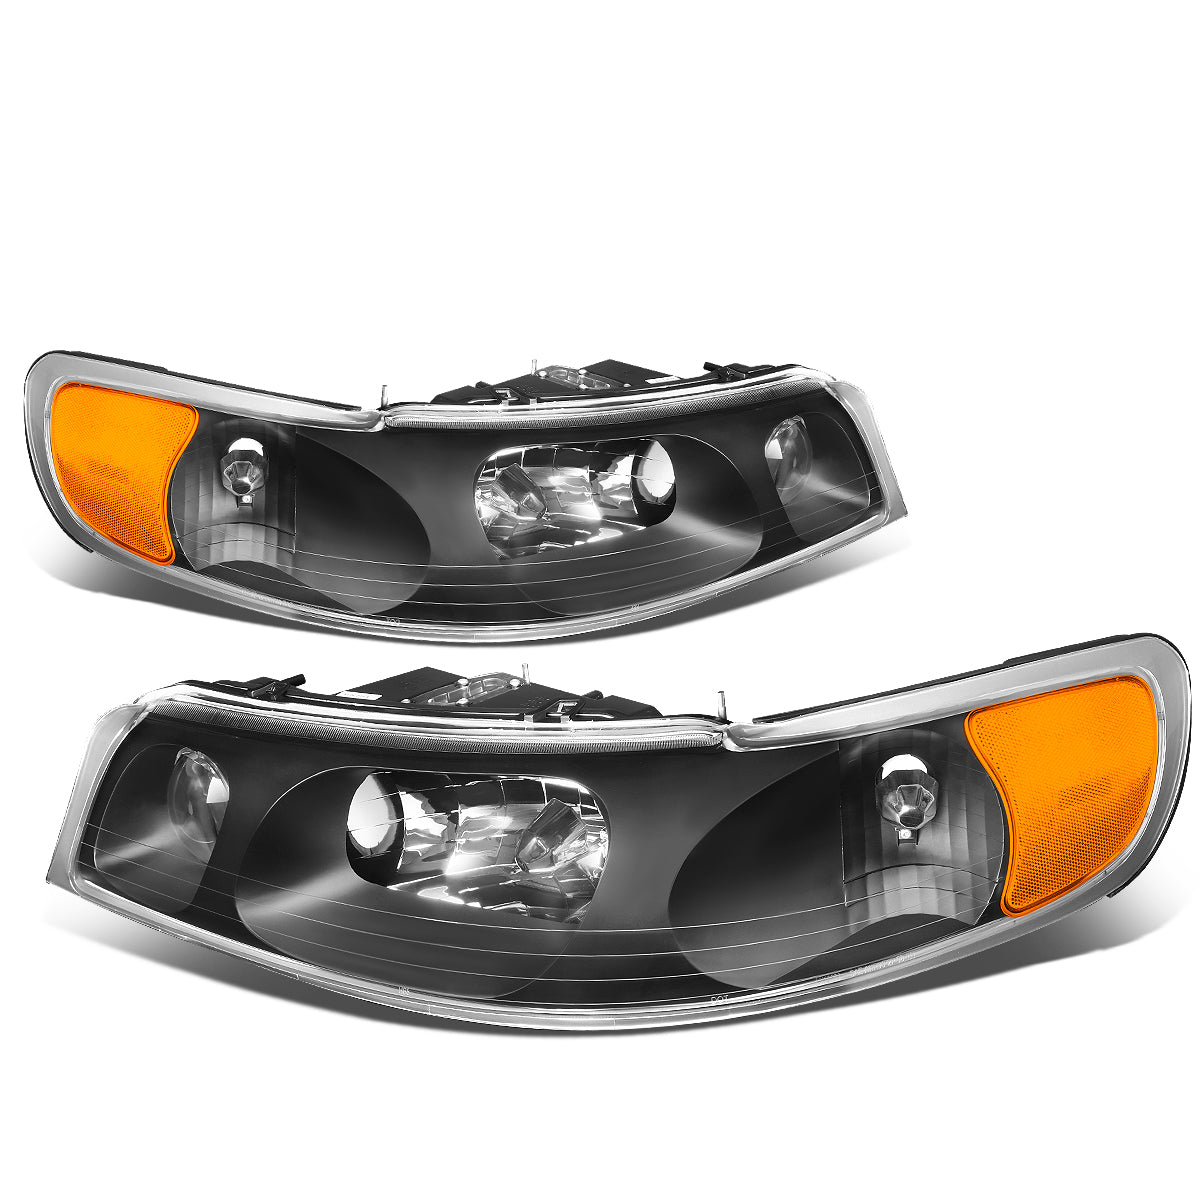 Factory Style Headlights<br>98-02 Lincoln Town Car